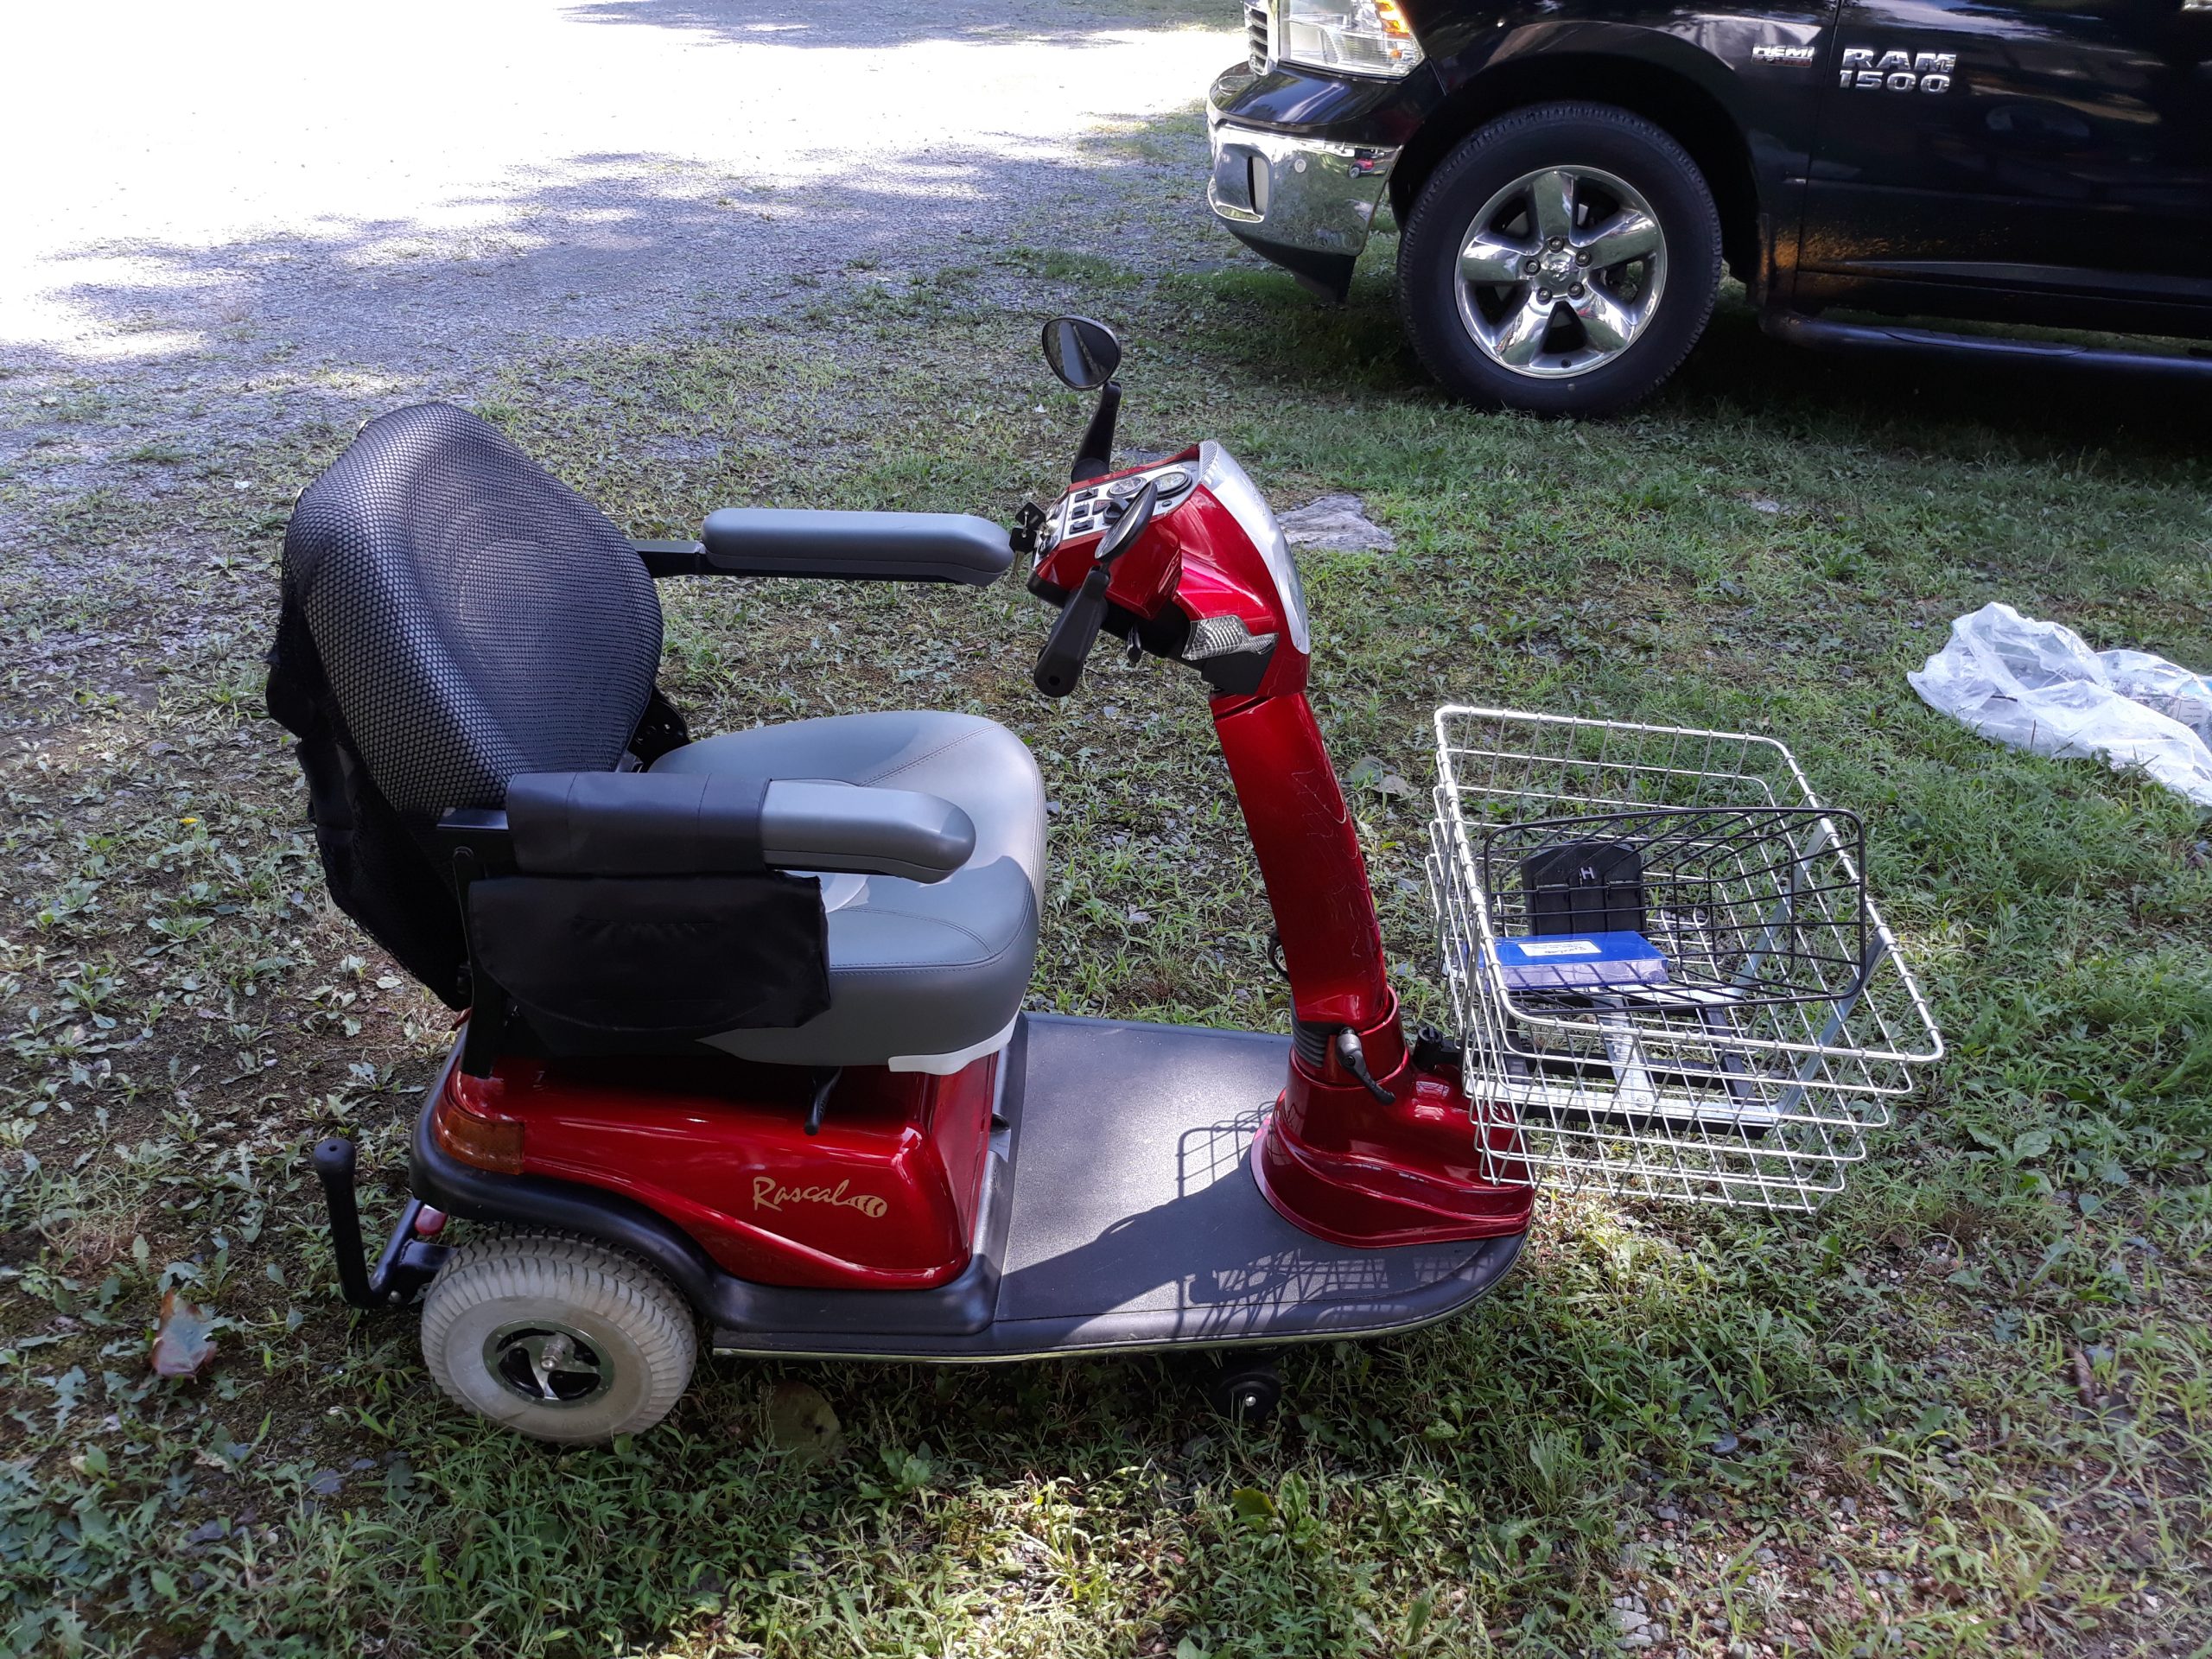 RASCAL 600 SCOOTER - Buy & Sell Used Electric Wheelchairs, Mobility